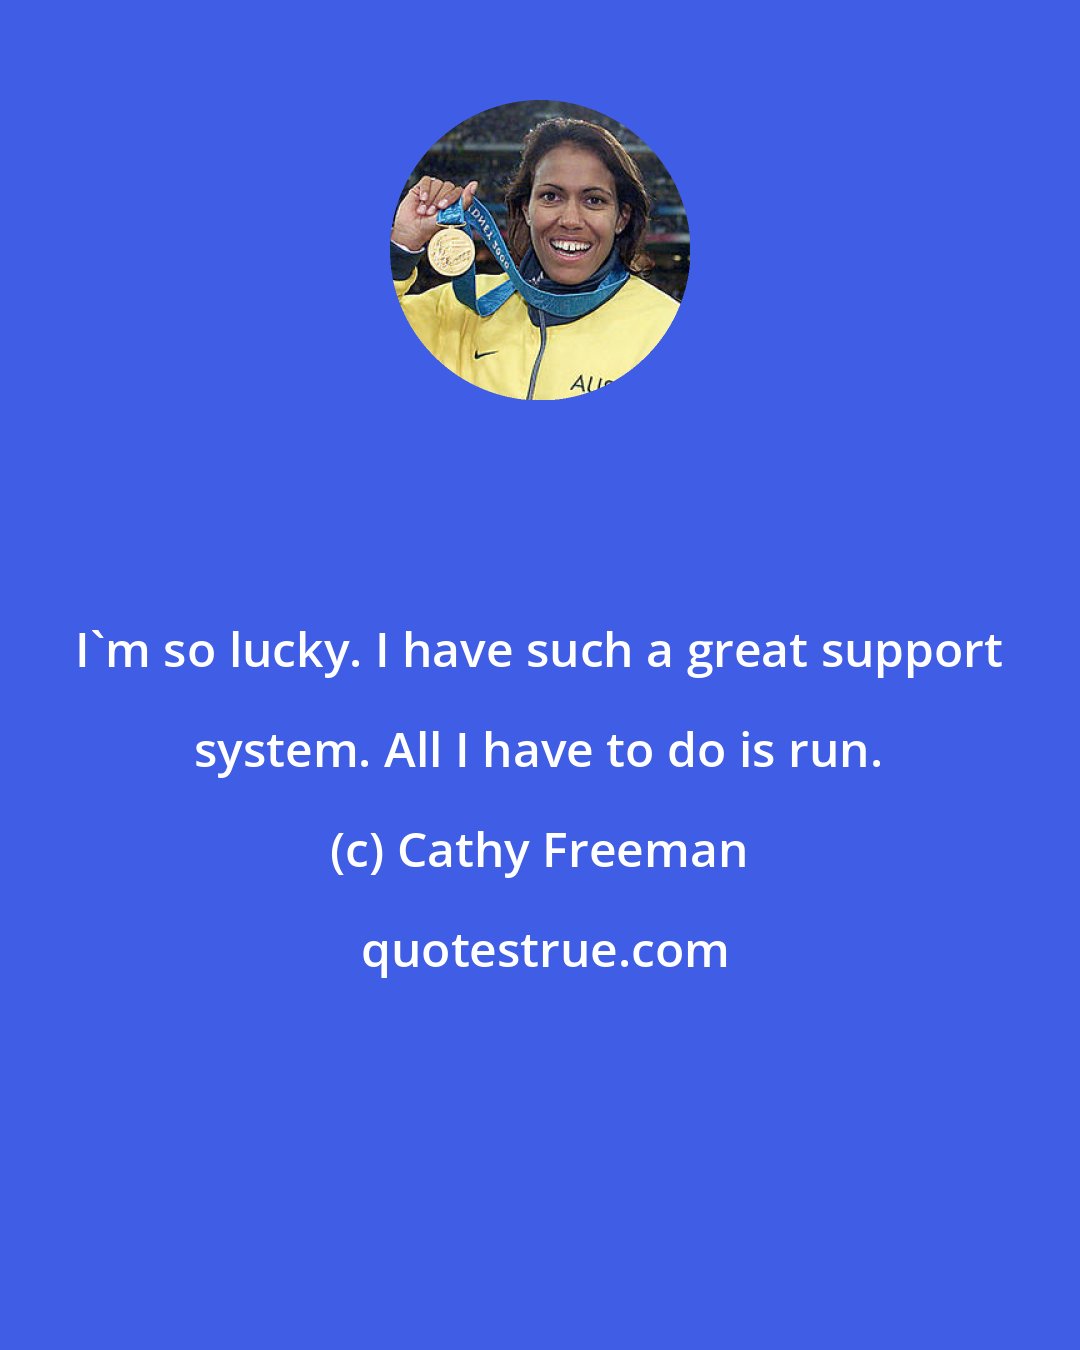 Cathy Freeman: I'm so lucky. I have such a great support system. All I have to do is run.